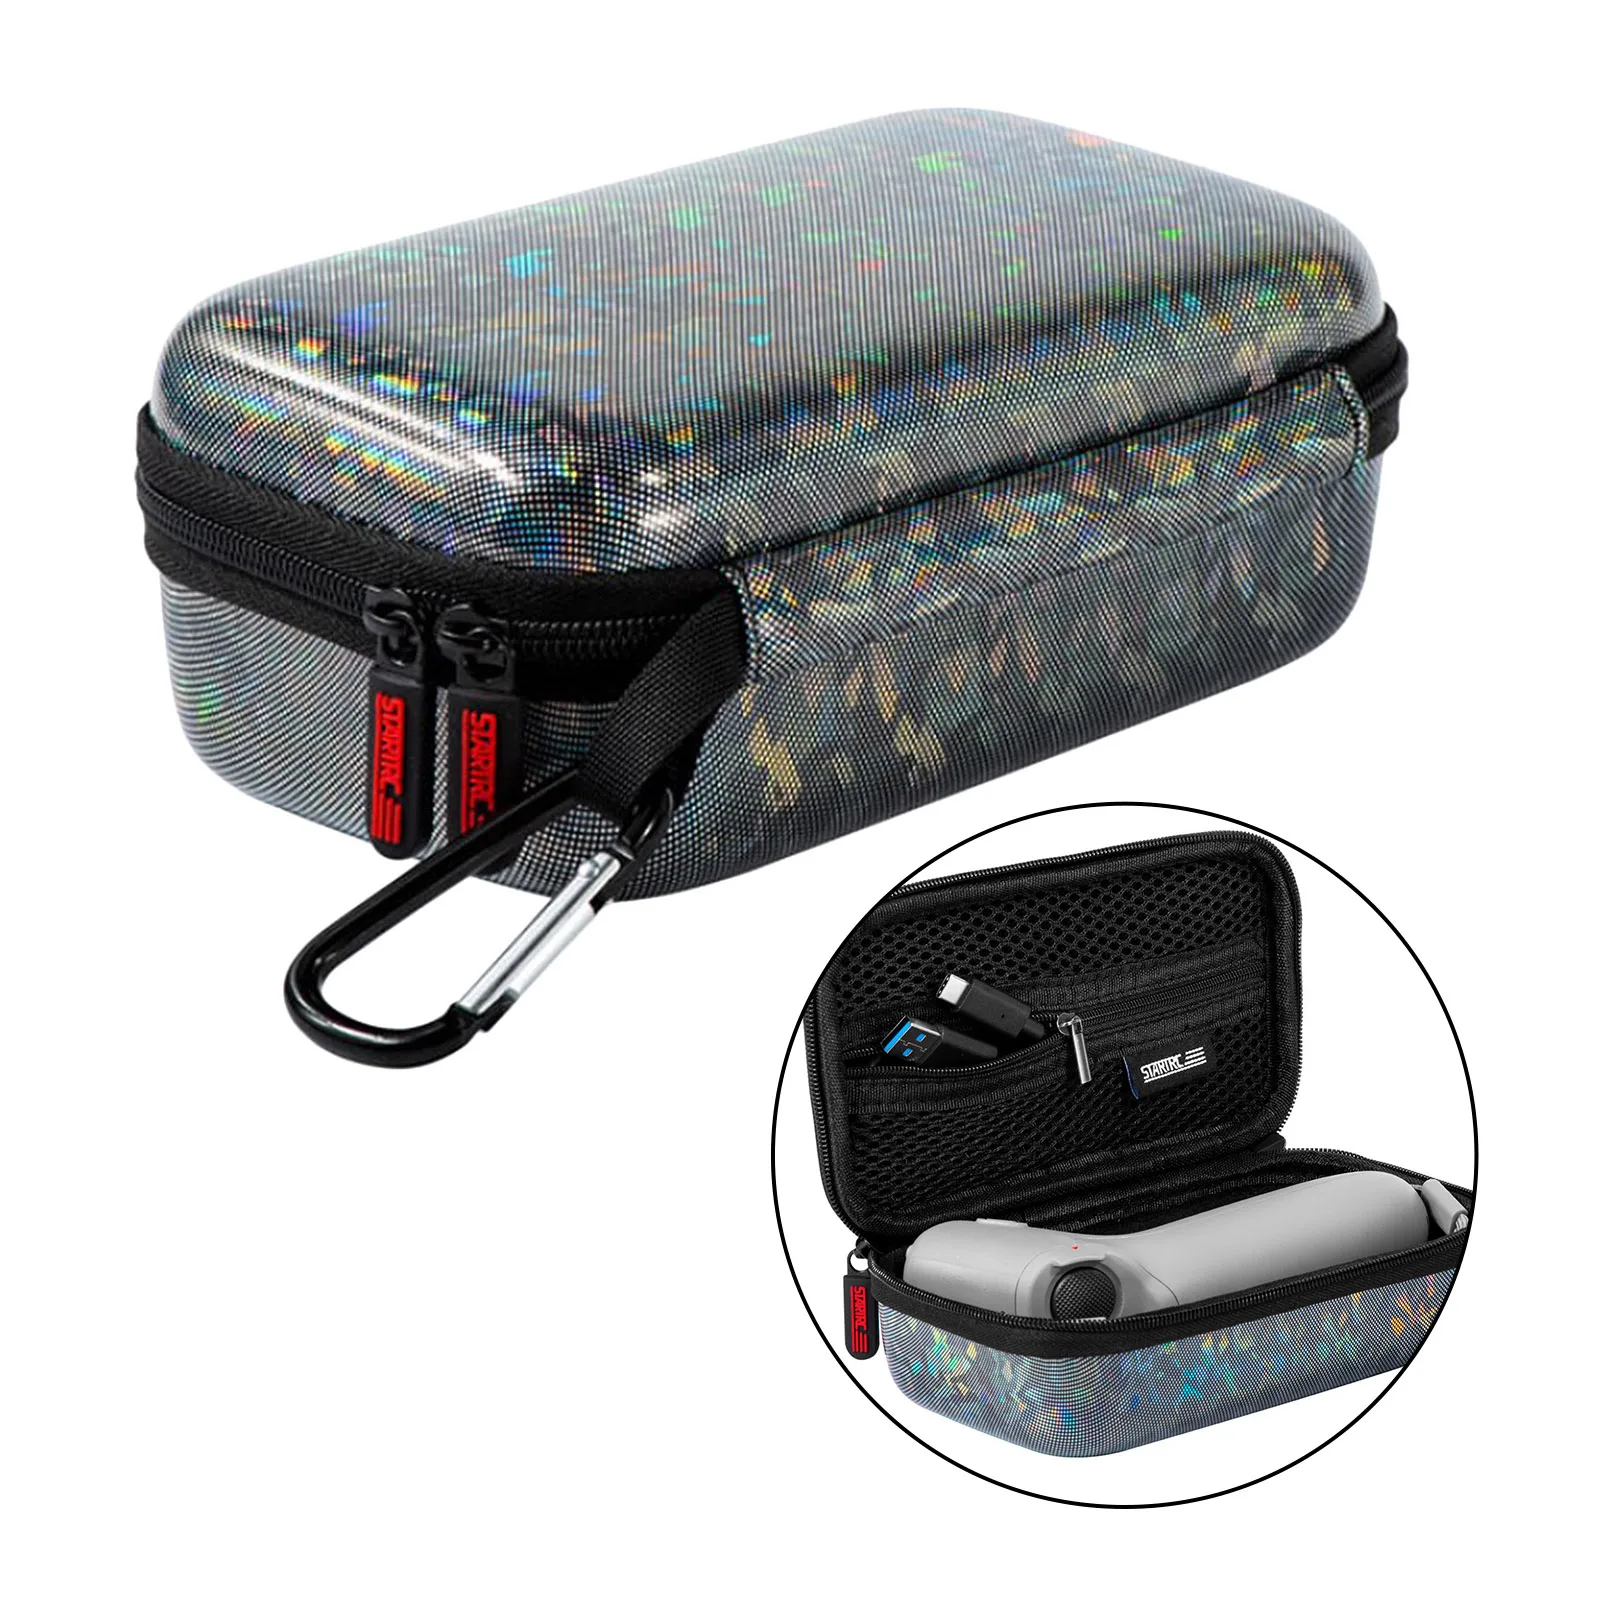 Carrying Case for DJI FPV Portable Storage Bag Carrying Case Mini Drone/Transmitter and Accessories (for Drone)